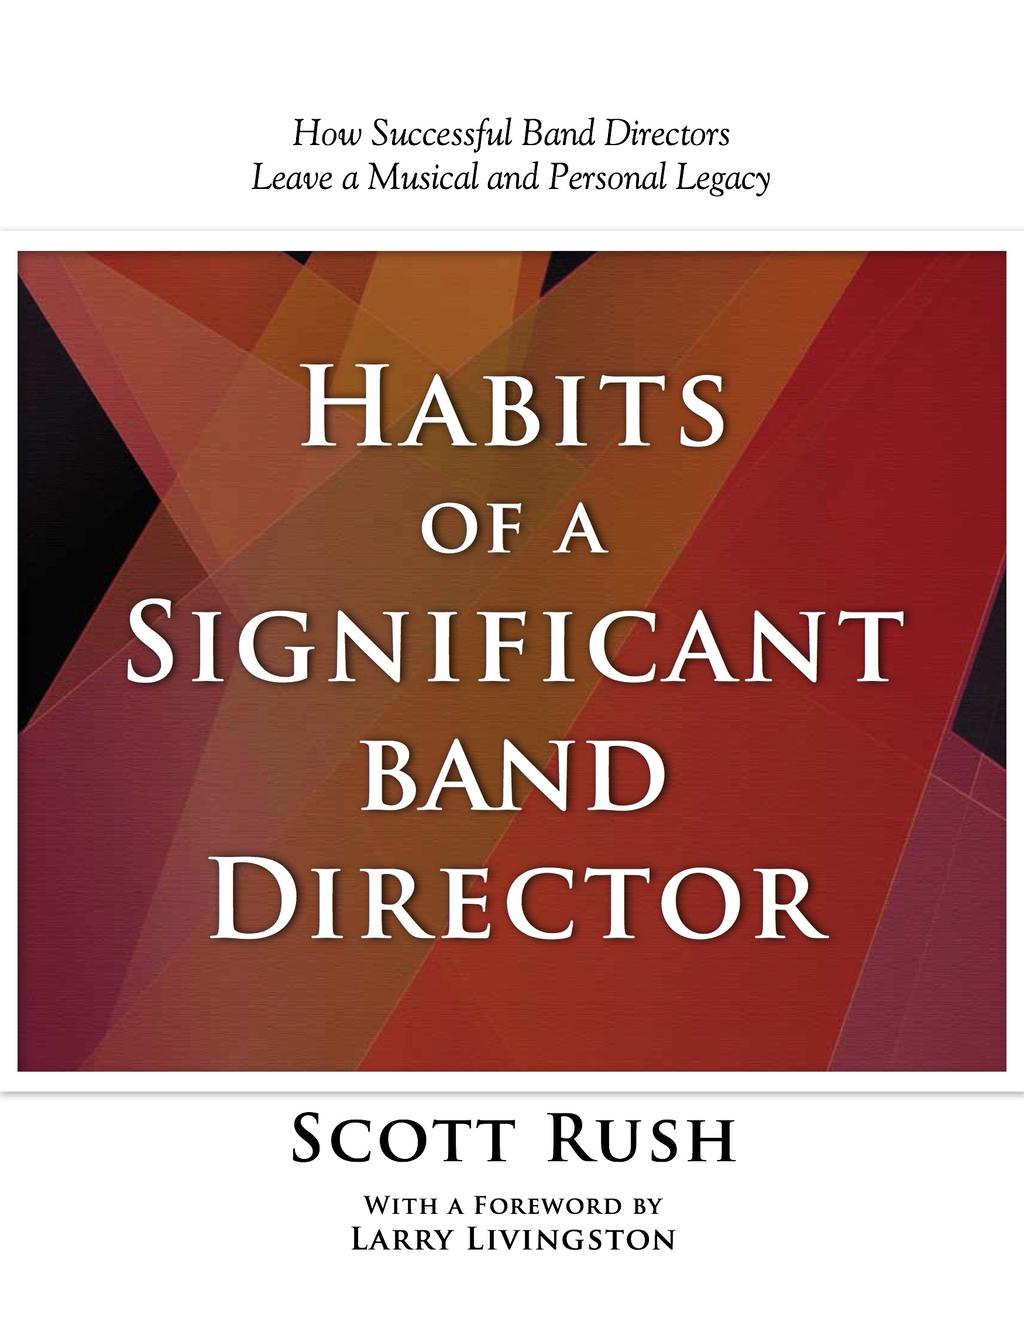 NEW! Habits of a Significant Band Director How Successful Band Directors Leave a Musical and Personal Legacy Habits of a Significant Band Director is the journey from pedagogical prowess to being